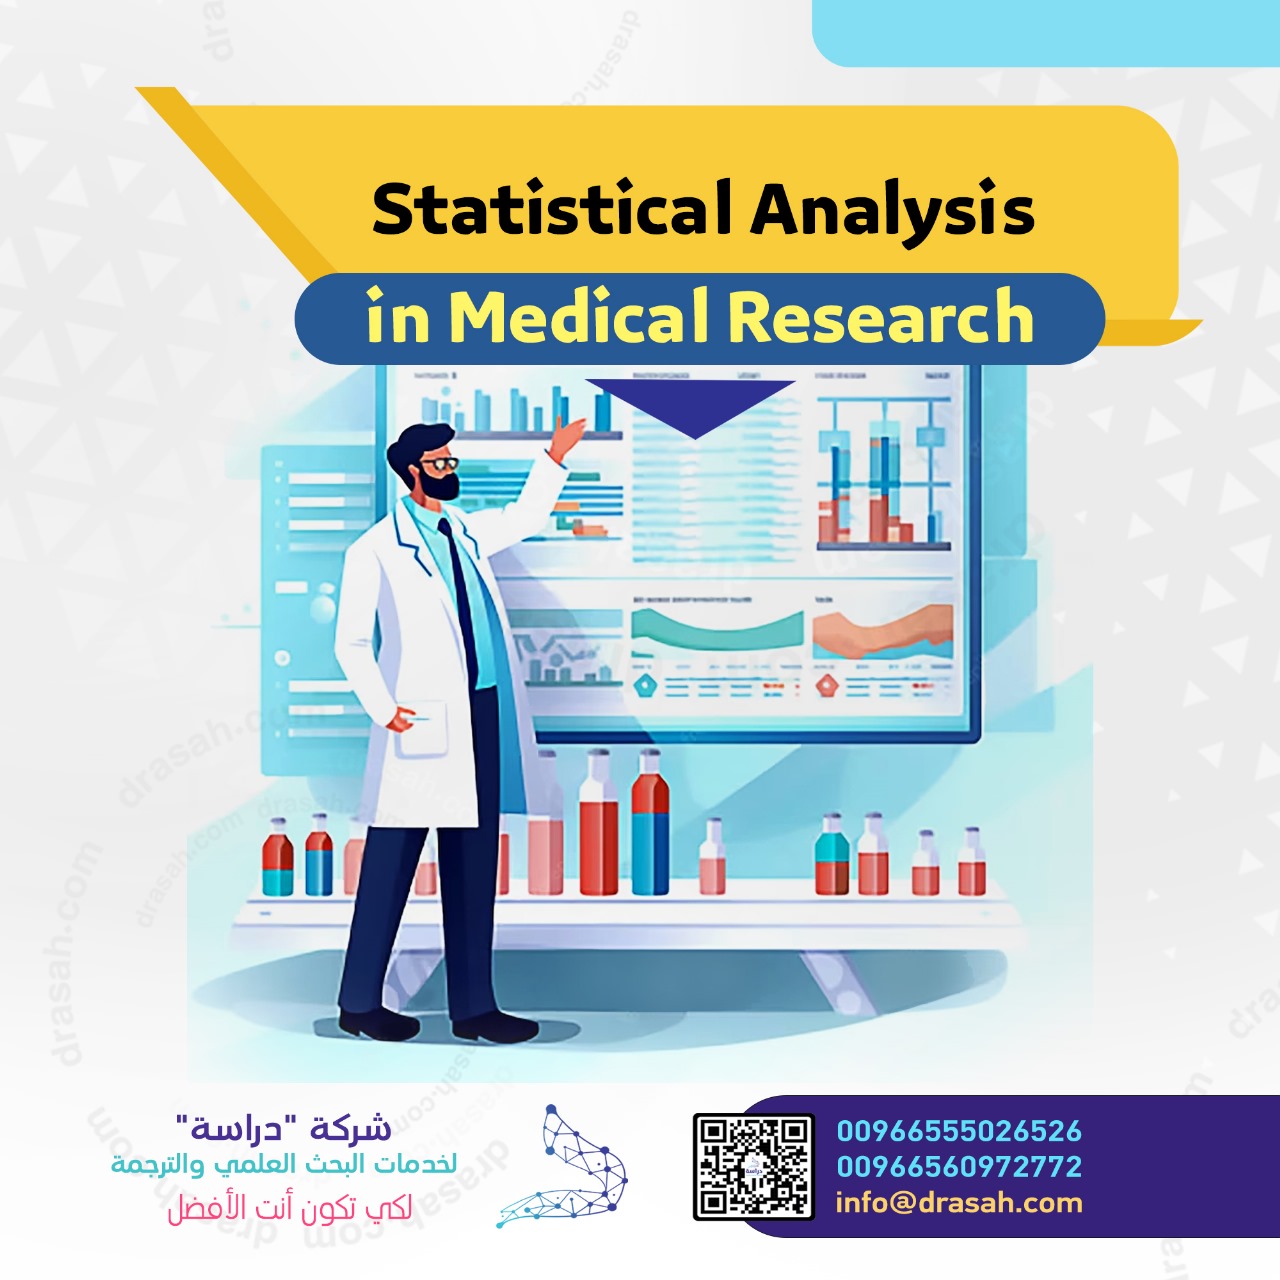 Statistical Analysis in Medical Research